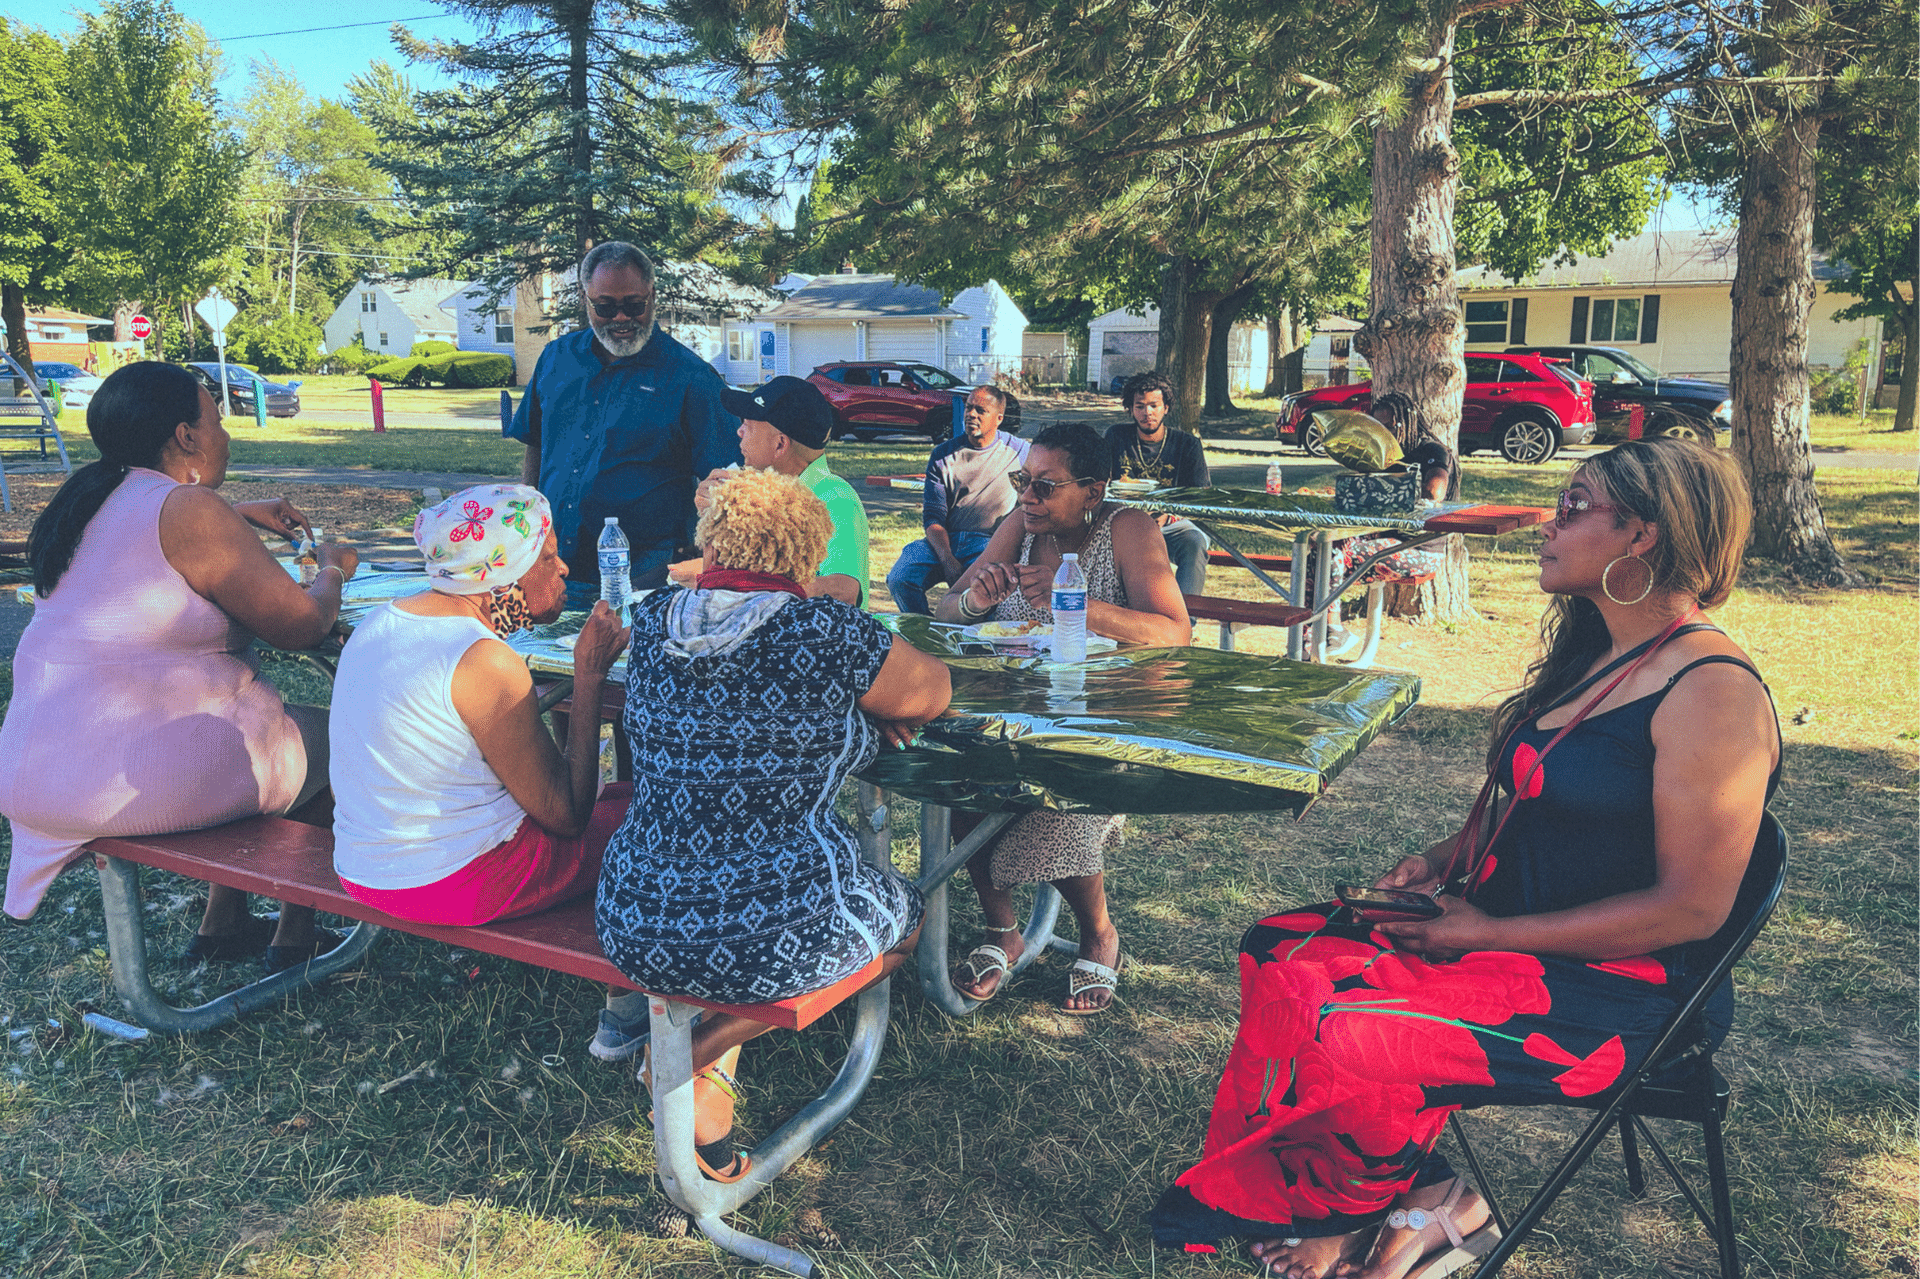 Sarvis Park residents enjoy music, conversations, and food on a hot summer day.